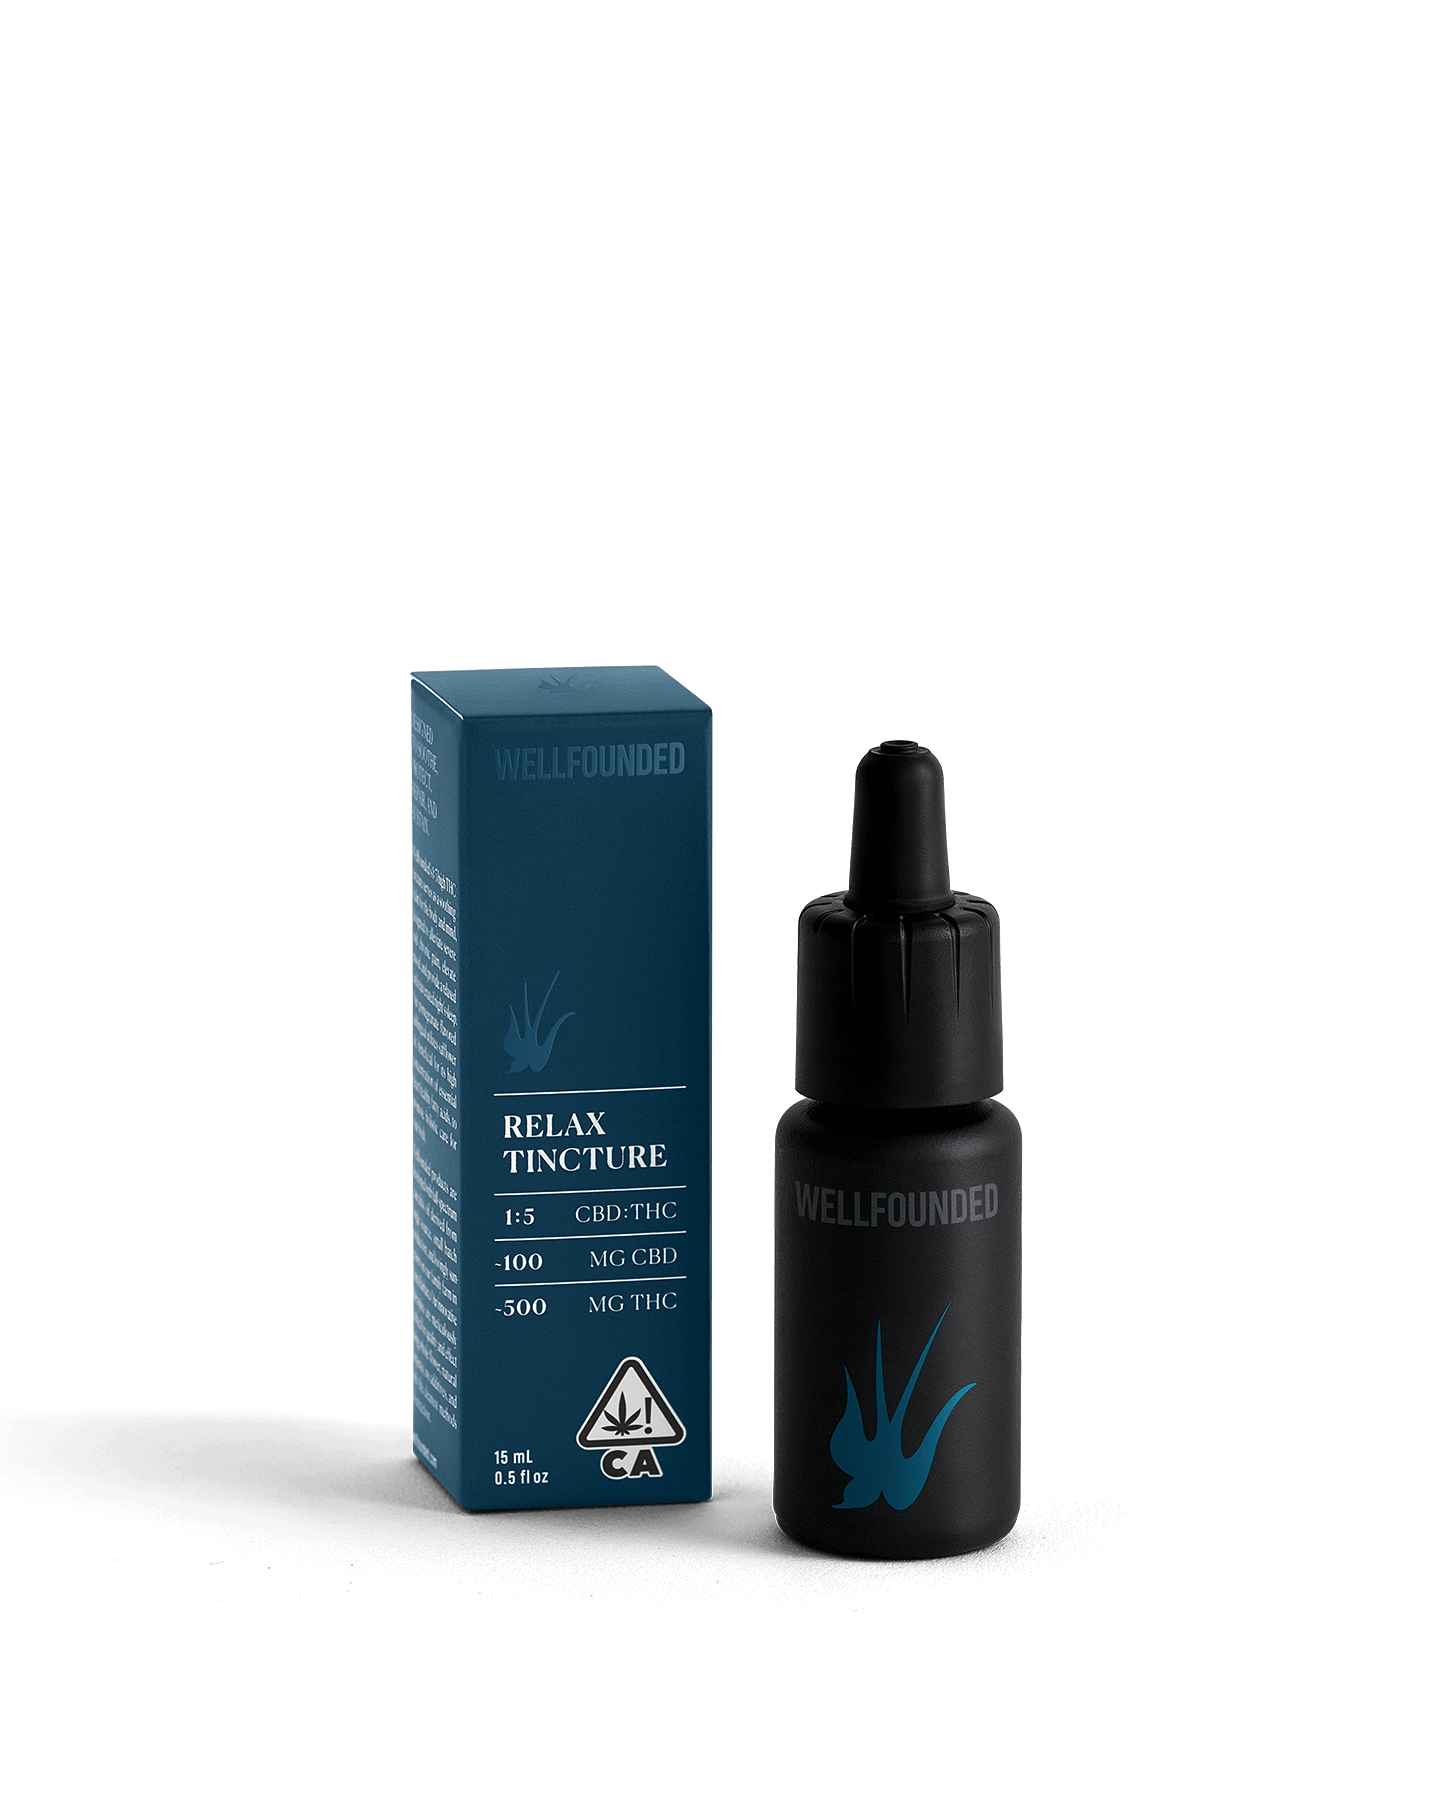 1:5 Relax Tincture – 15 mL